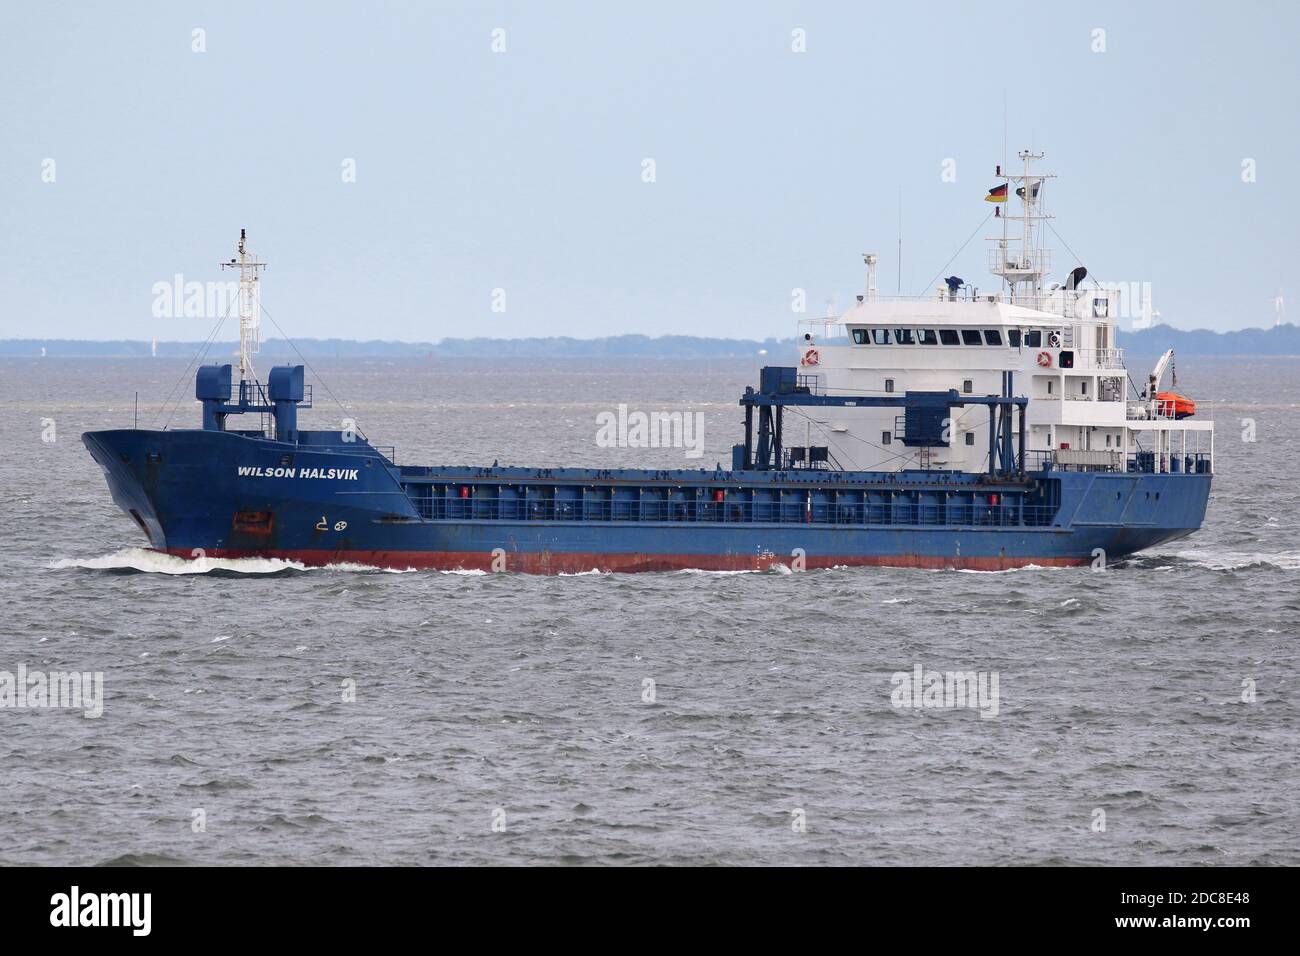 The cargo ship Wilson Halsvik will pass Cuxhaven on August 21, 2020 on its way to the North Sea. Stock Photo